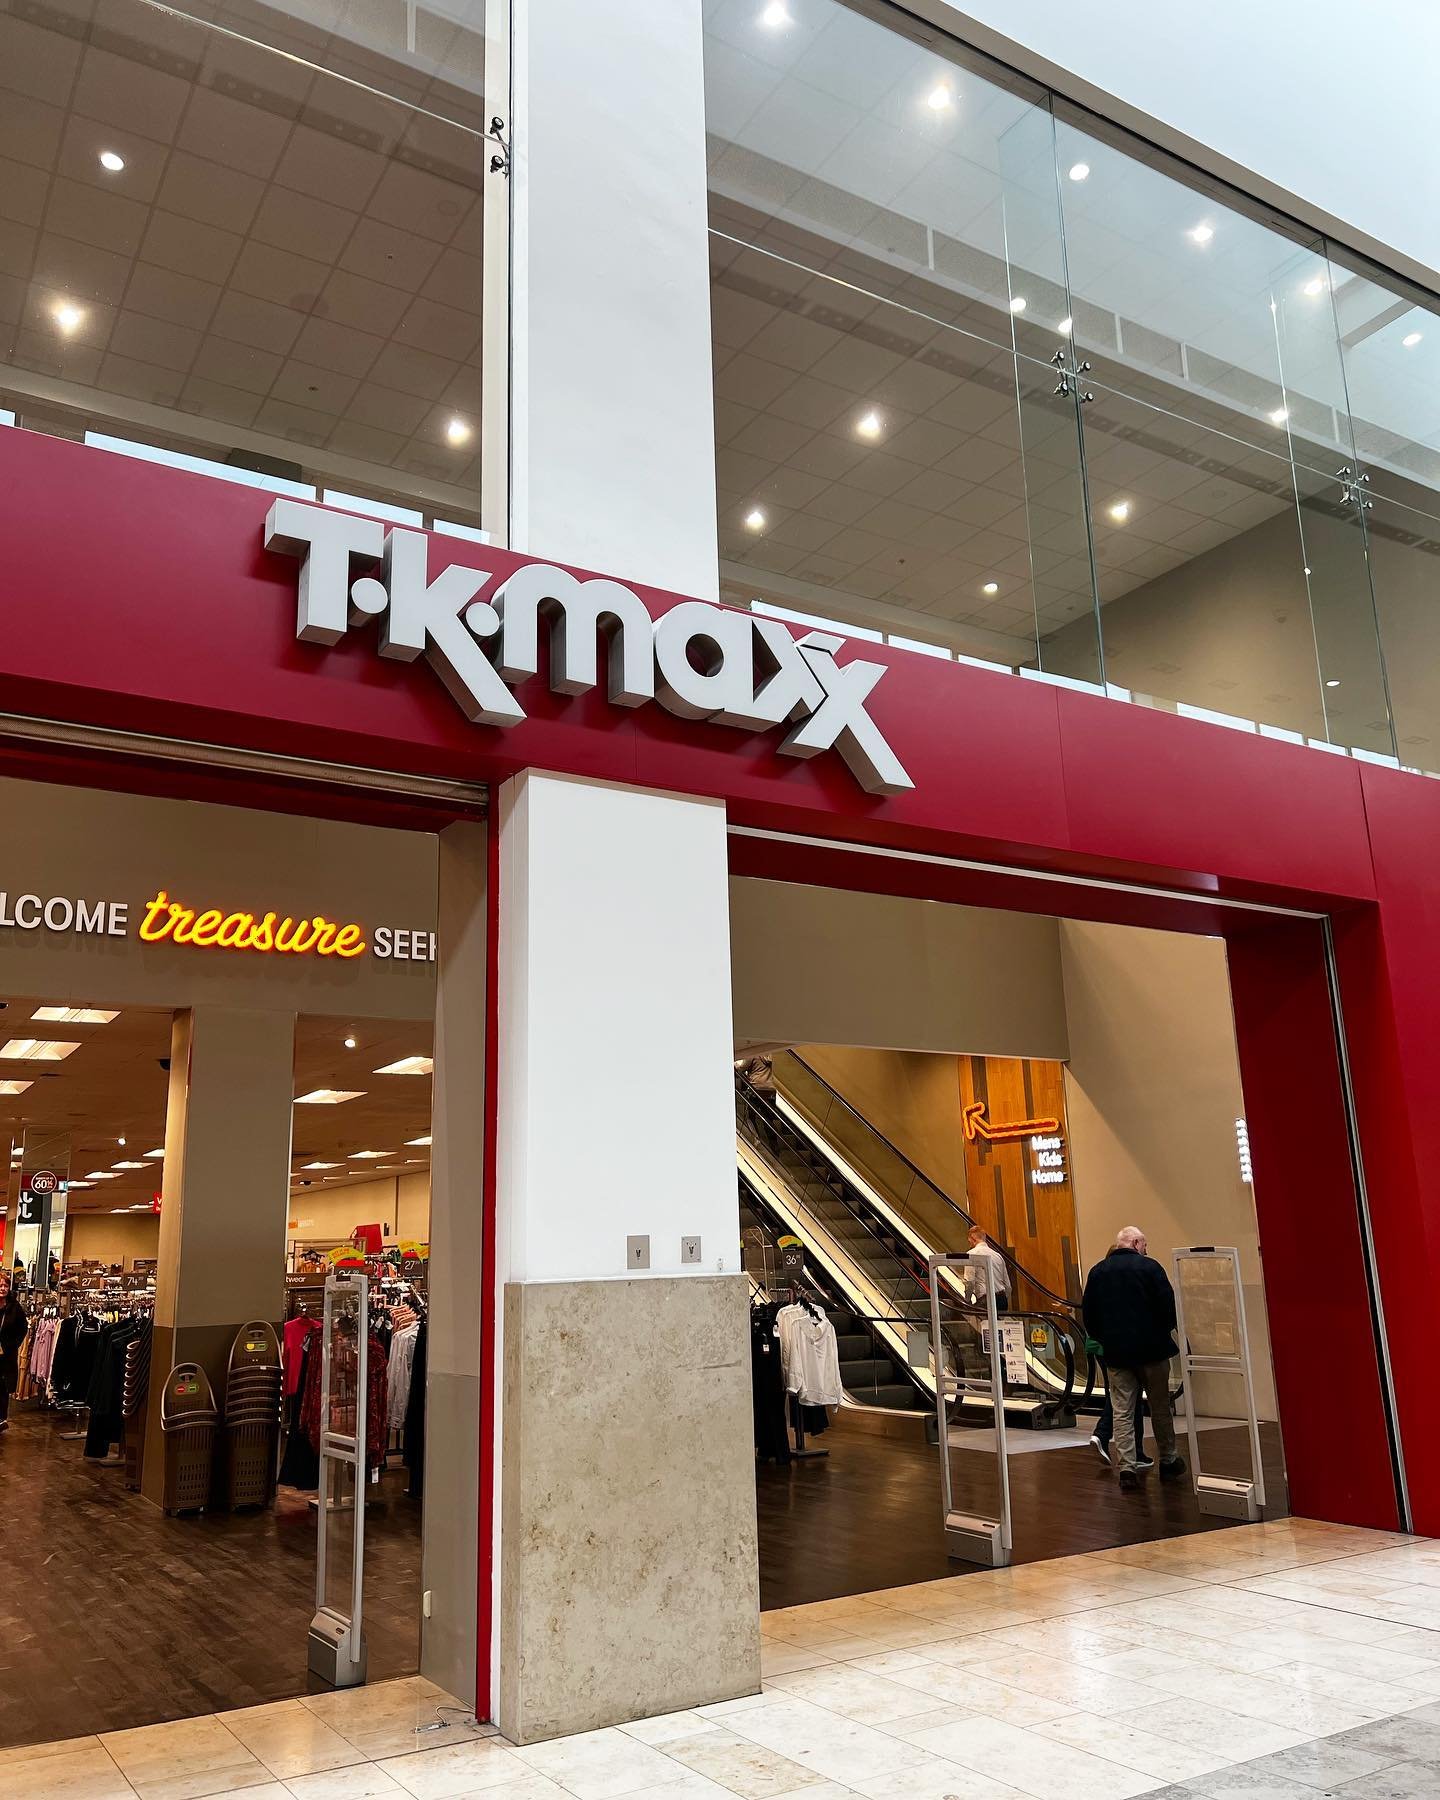 Top Fashion, Gifting & Homeware Brands, Up to 60% Less* - TK Maxx UK